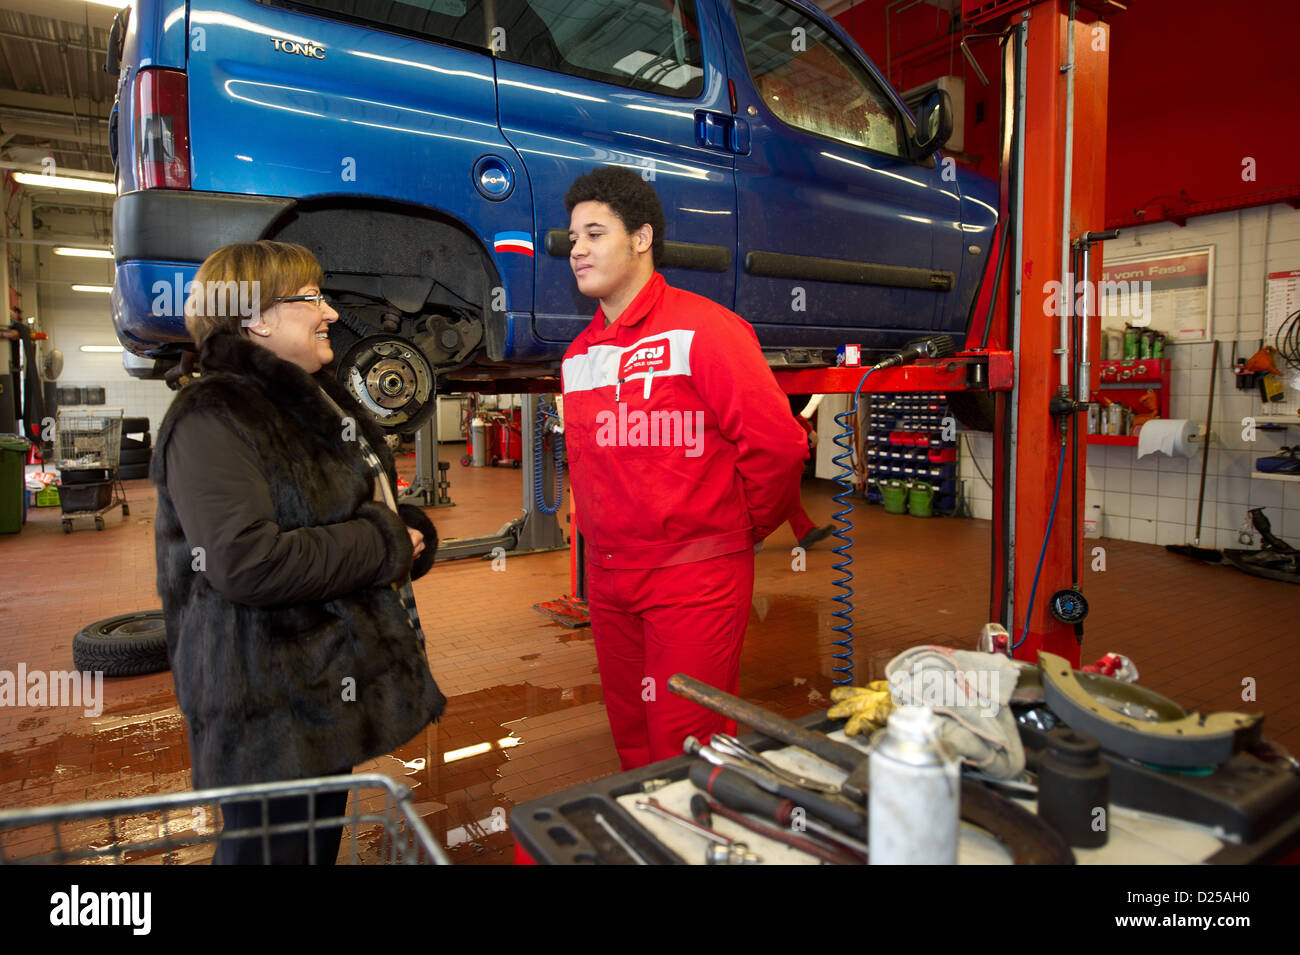 Djamil (15 years old), participant of the school pilot project 'Productive Learning,' talks with Saxony's Culture Minister Brunhild Kurth during her visit to a mechanic's garage (ATU-Autoteile Unger) in Dresden, Germany, 14 January 2013. The project for pupils who are in danger of not finishing high school, is being offered permanently in Saxony, according to Saxony's Culture Minister Kurth on Monday. At the moment around 200 pupils in the 8th and 9th year spend two days a week doing an internship of their own choosing. Photo: Arno Burgi Stock Photo